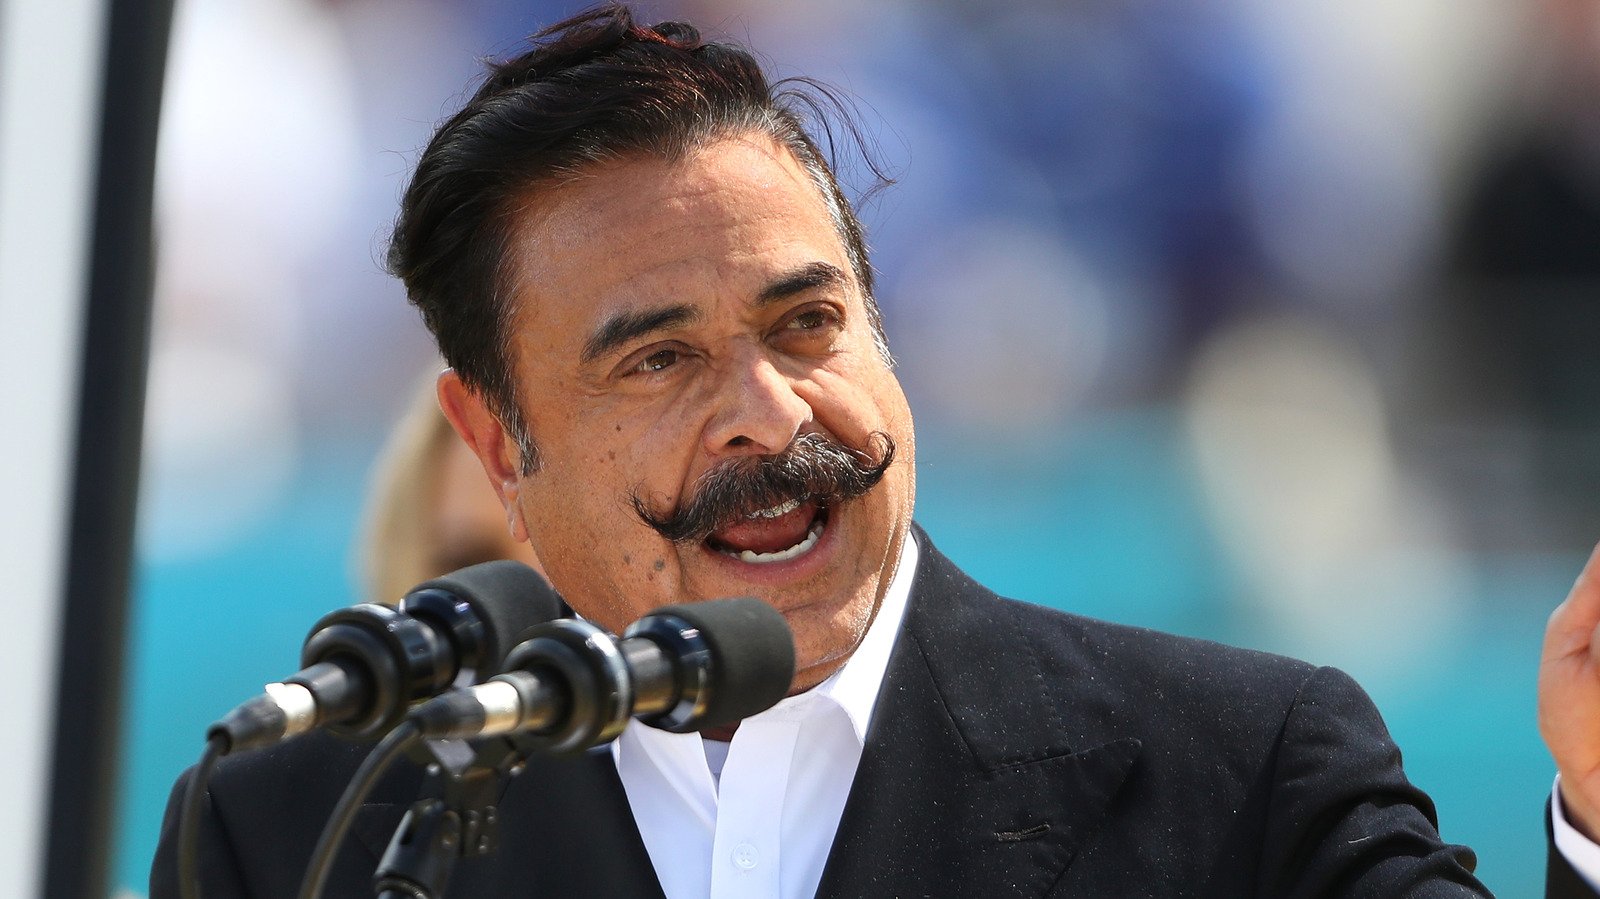 AEW Owner Shahid Khan Only Earned $1.20 An Hour For His First American Job - Wrestling Inc.